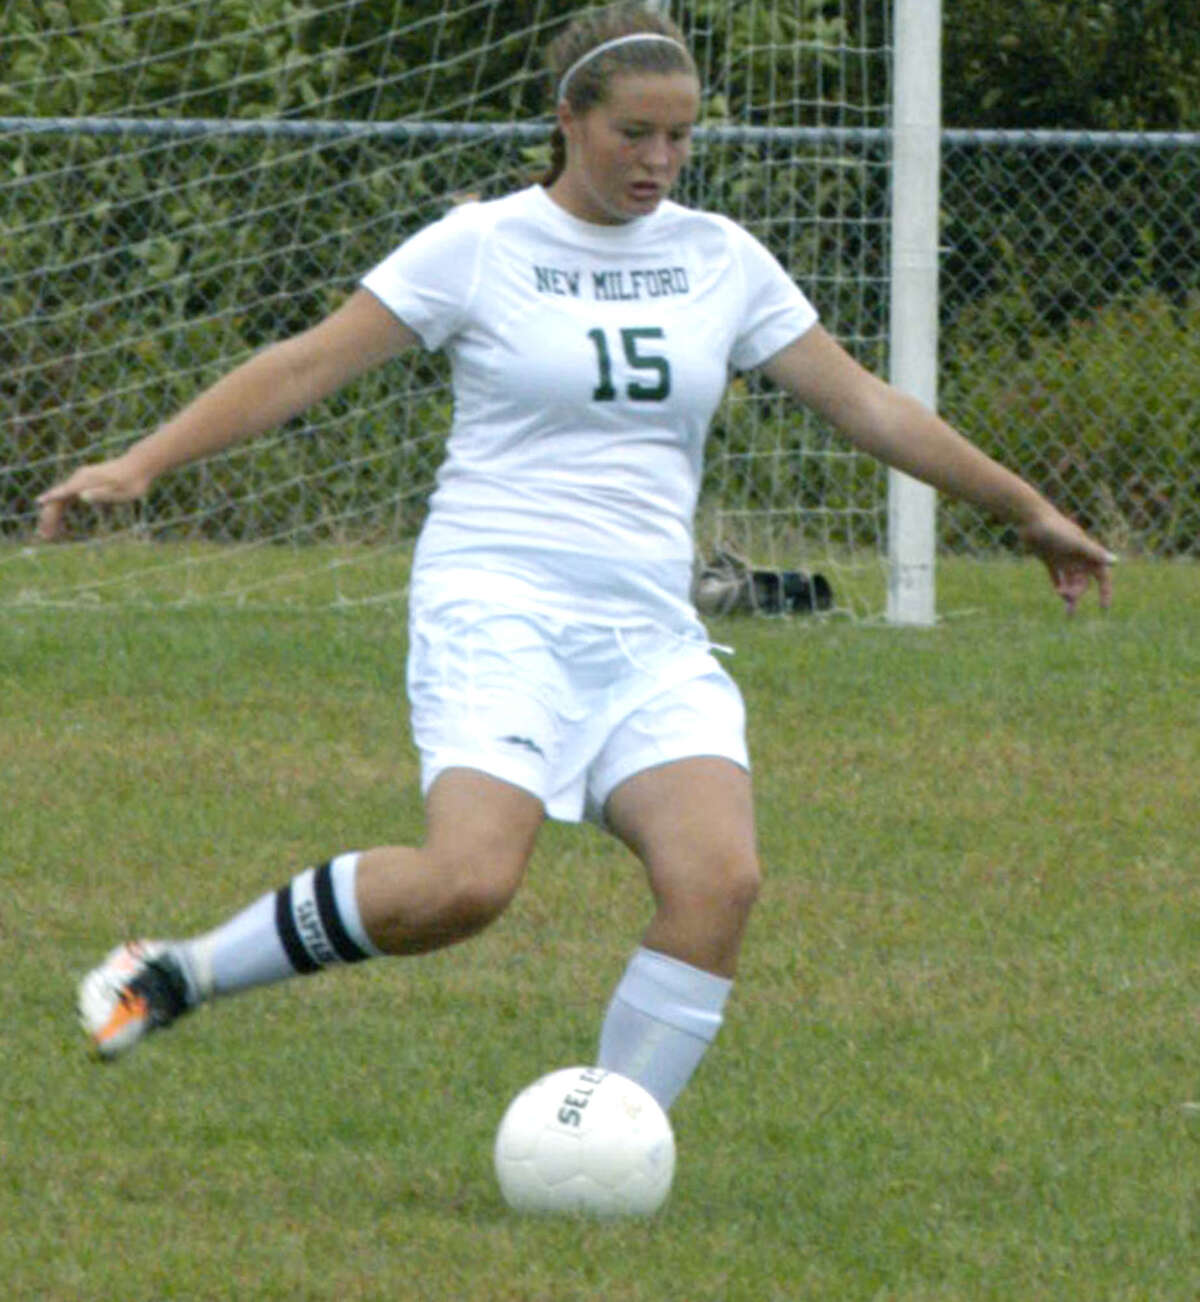 Green Wave defensive stalwart Madison Ranno clears the balll from the zone during New Milford High School girls' soccer's Sept. 22, 2012 match vs. Kolbe Cathedral at NMHS.